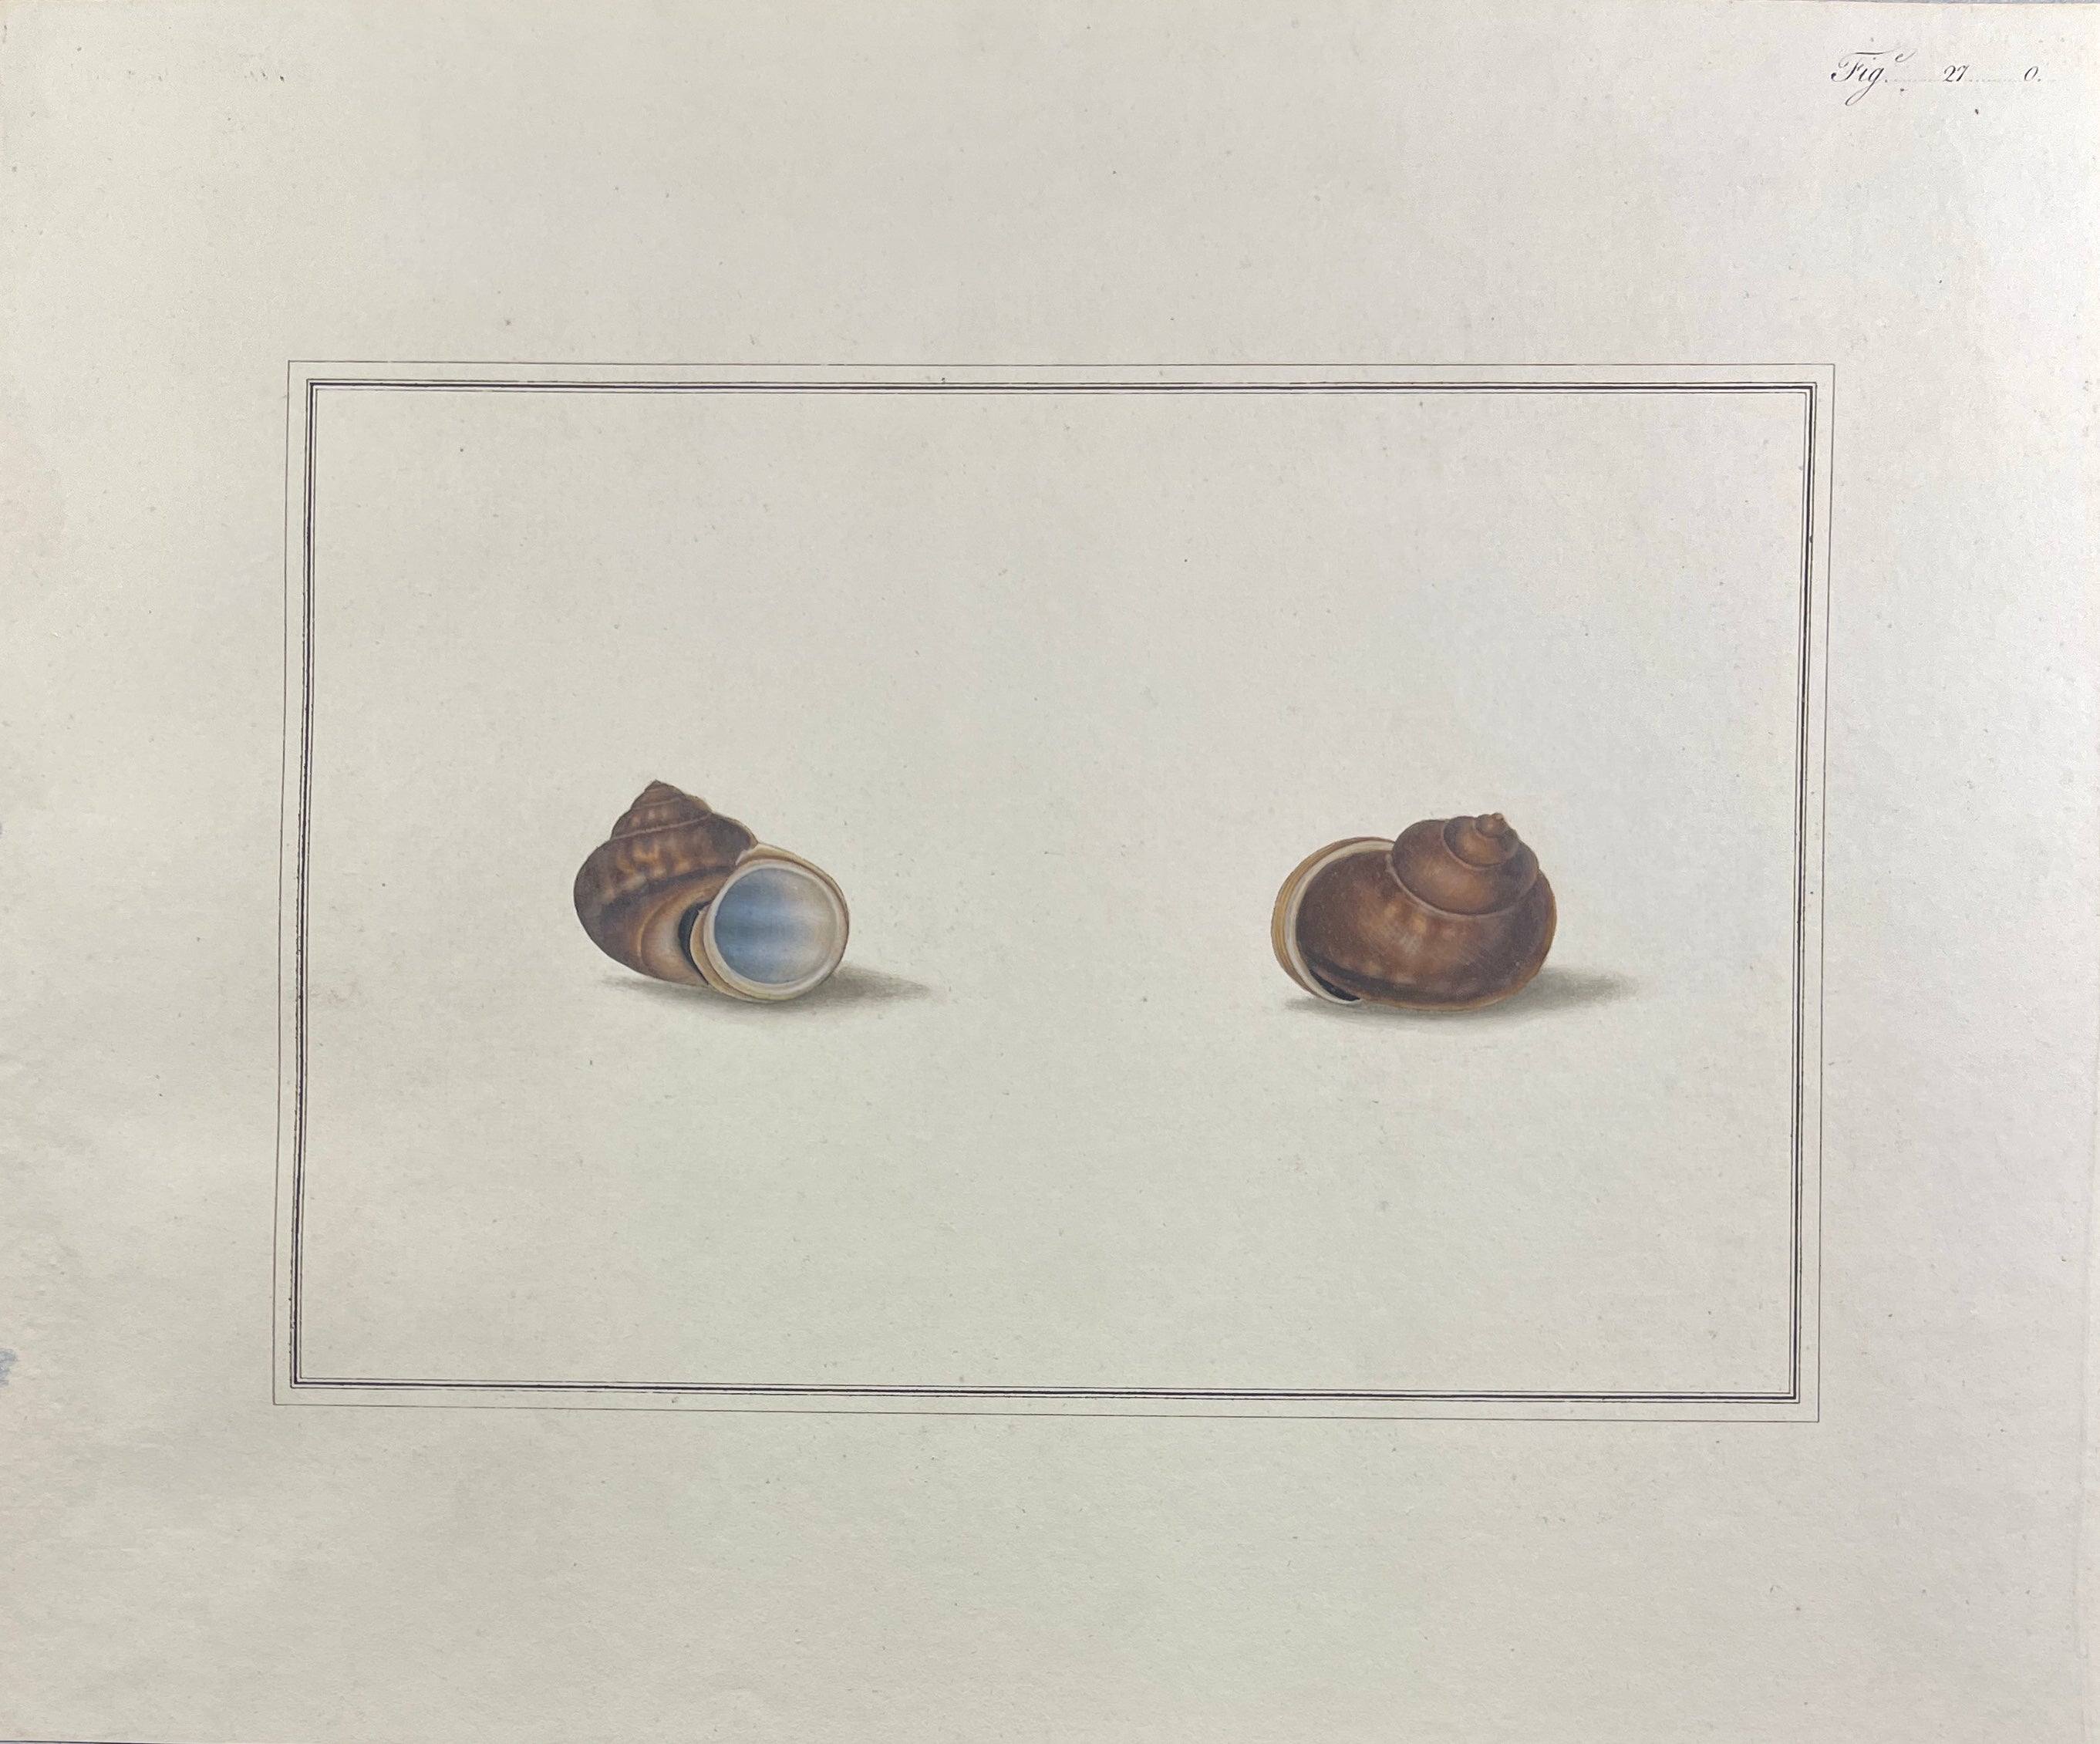 Thomas Martyn 1784 Original French Horn Snail Shell Print Plate 27 - Found at Pulo Condore - Hand-Colored Tipped-In Engraving at Adirondack Retro